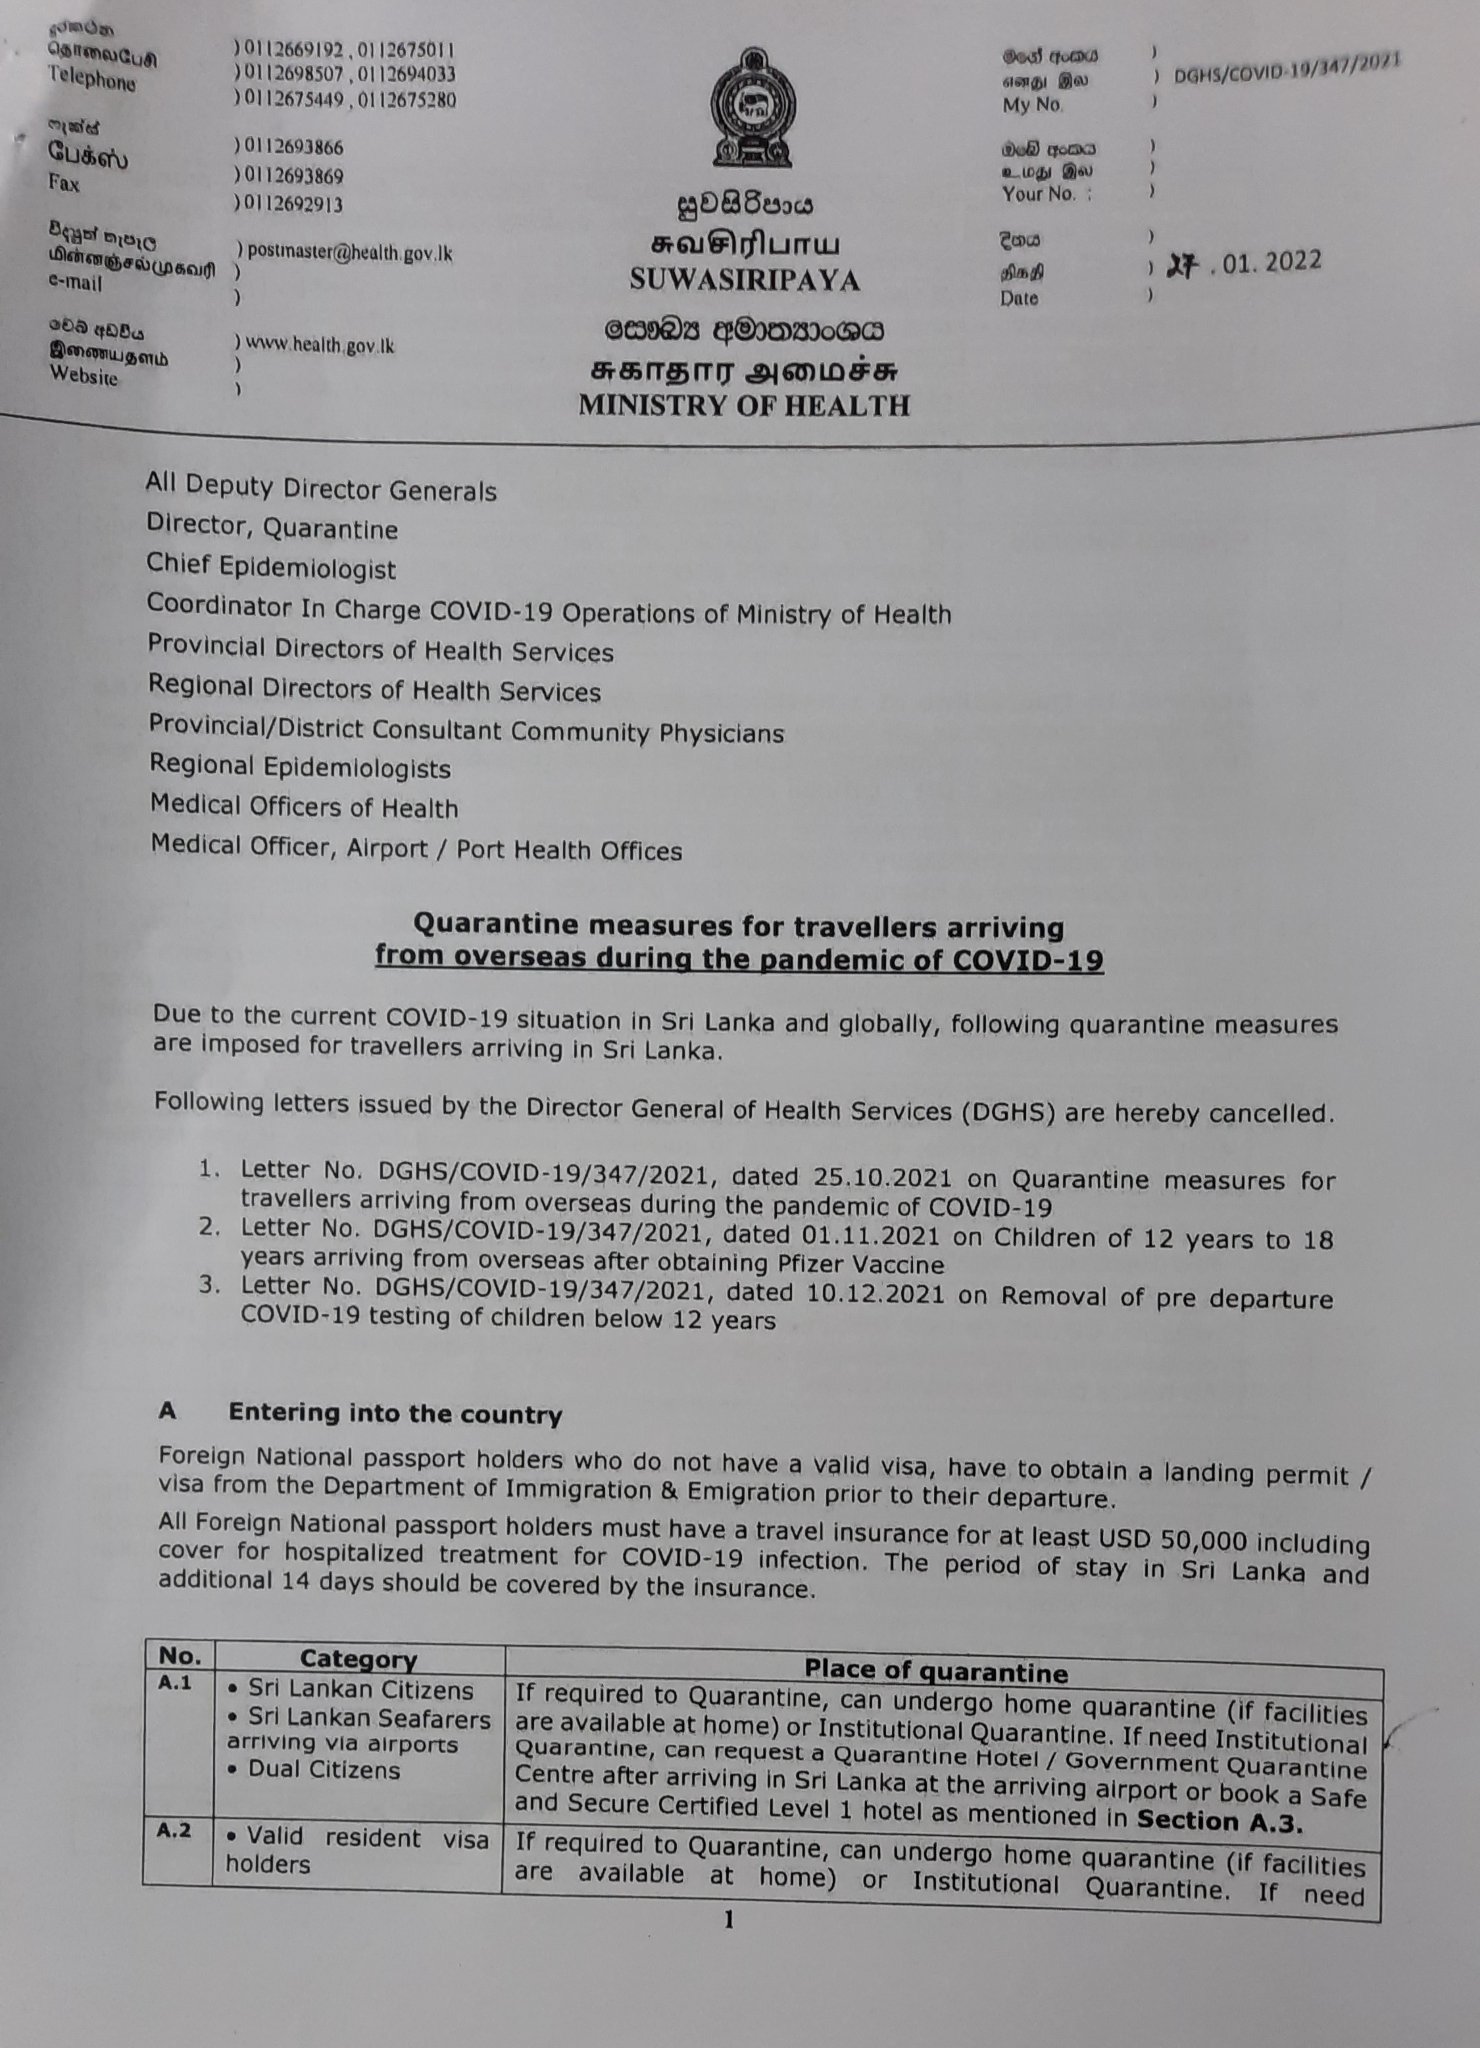 Quarantine measures for travelers arriving in Sri Lanka from overseas during the pandemic of COVID-19-27.01.2022</p>
<p>